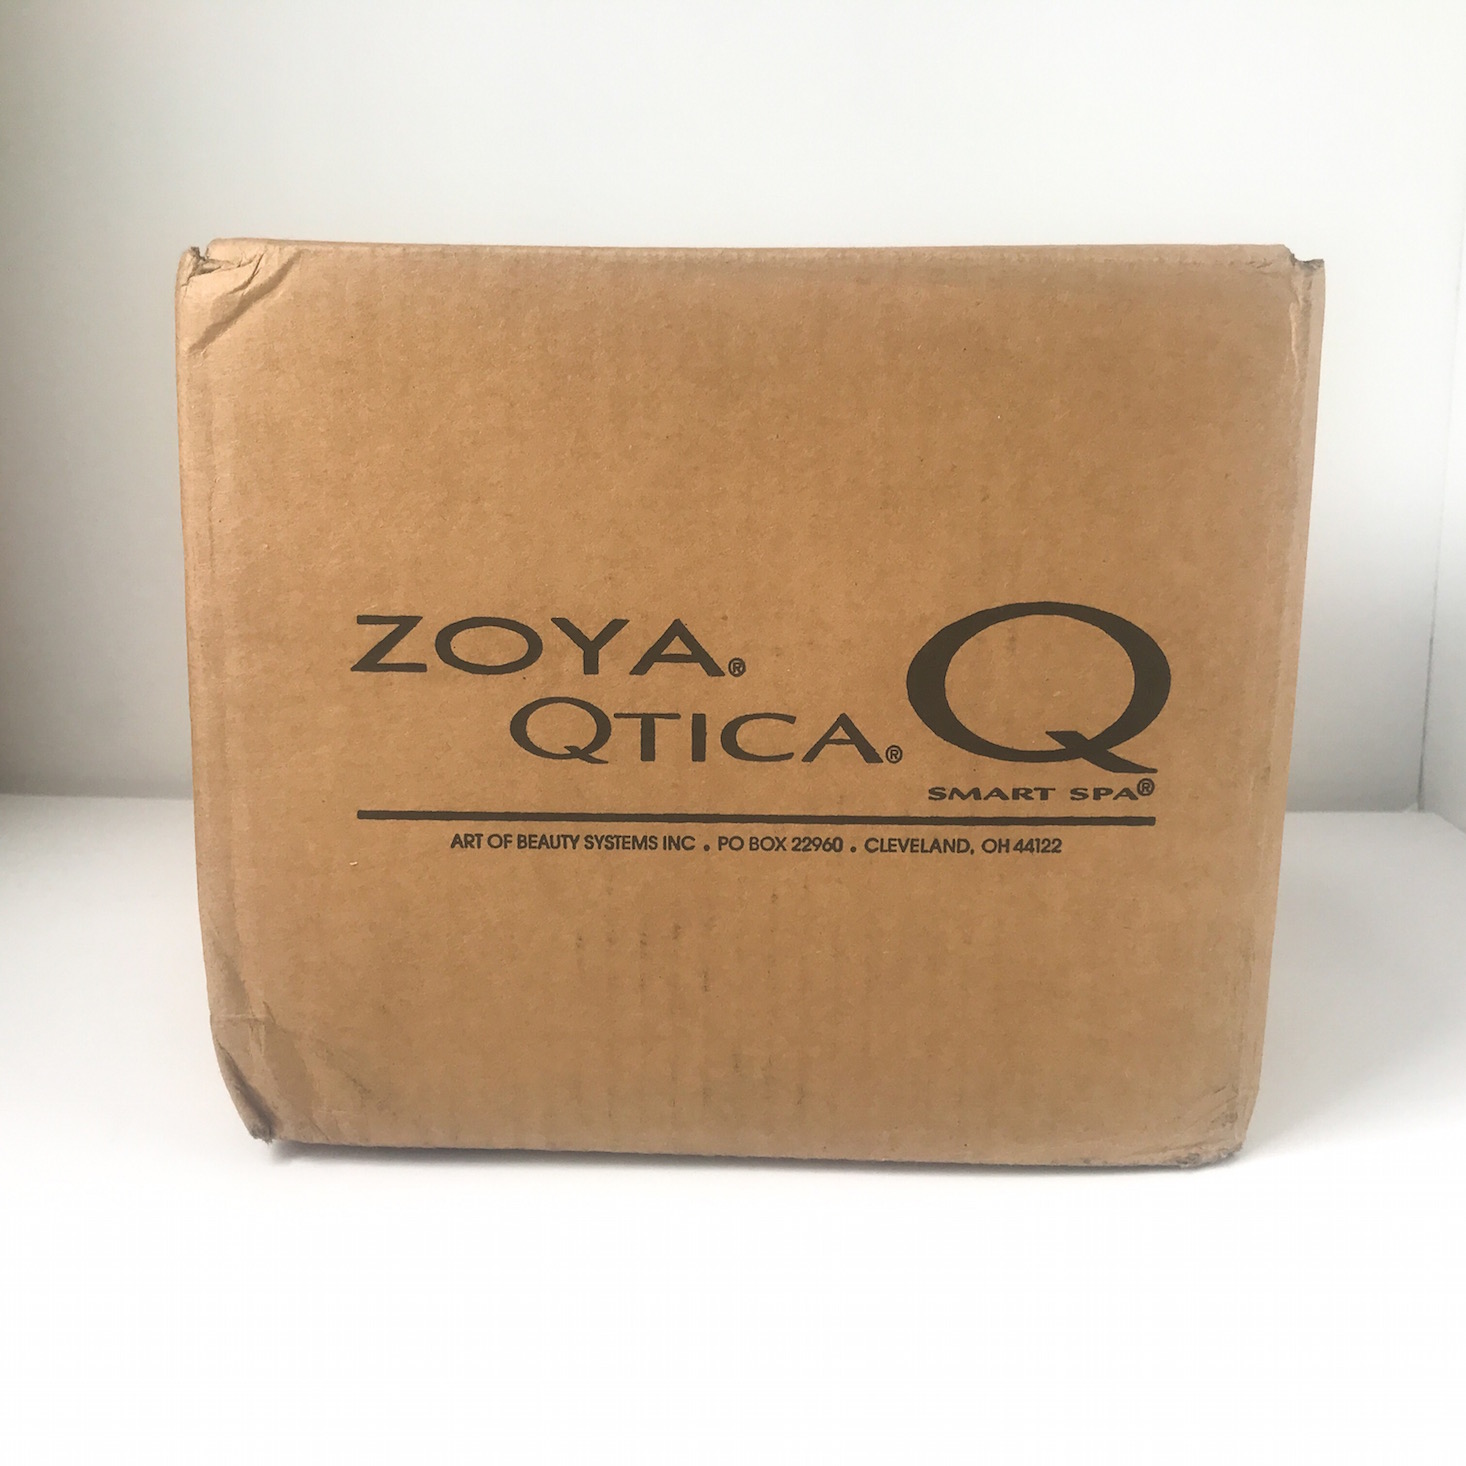 Zoya Back to School Limited Edition Box Review